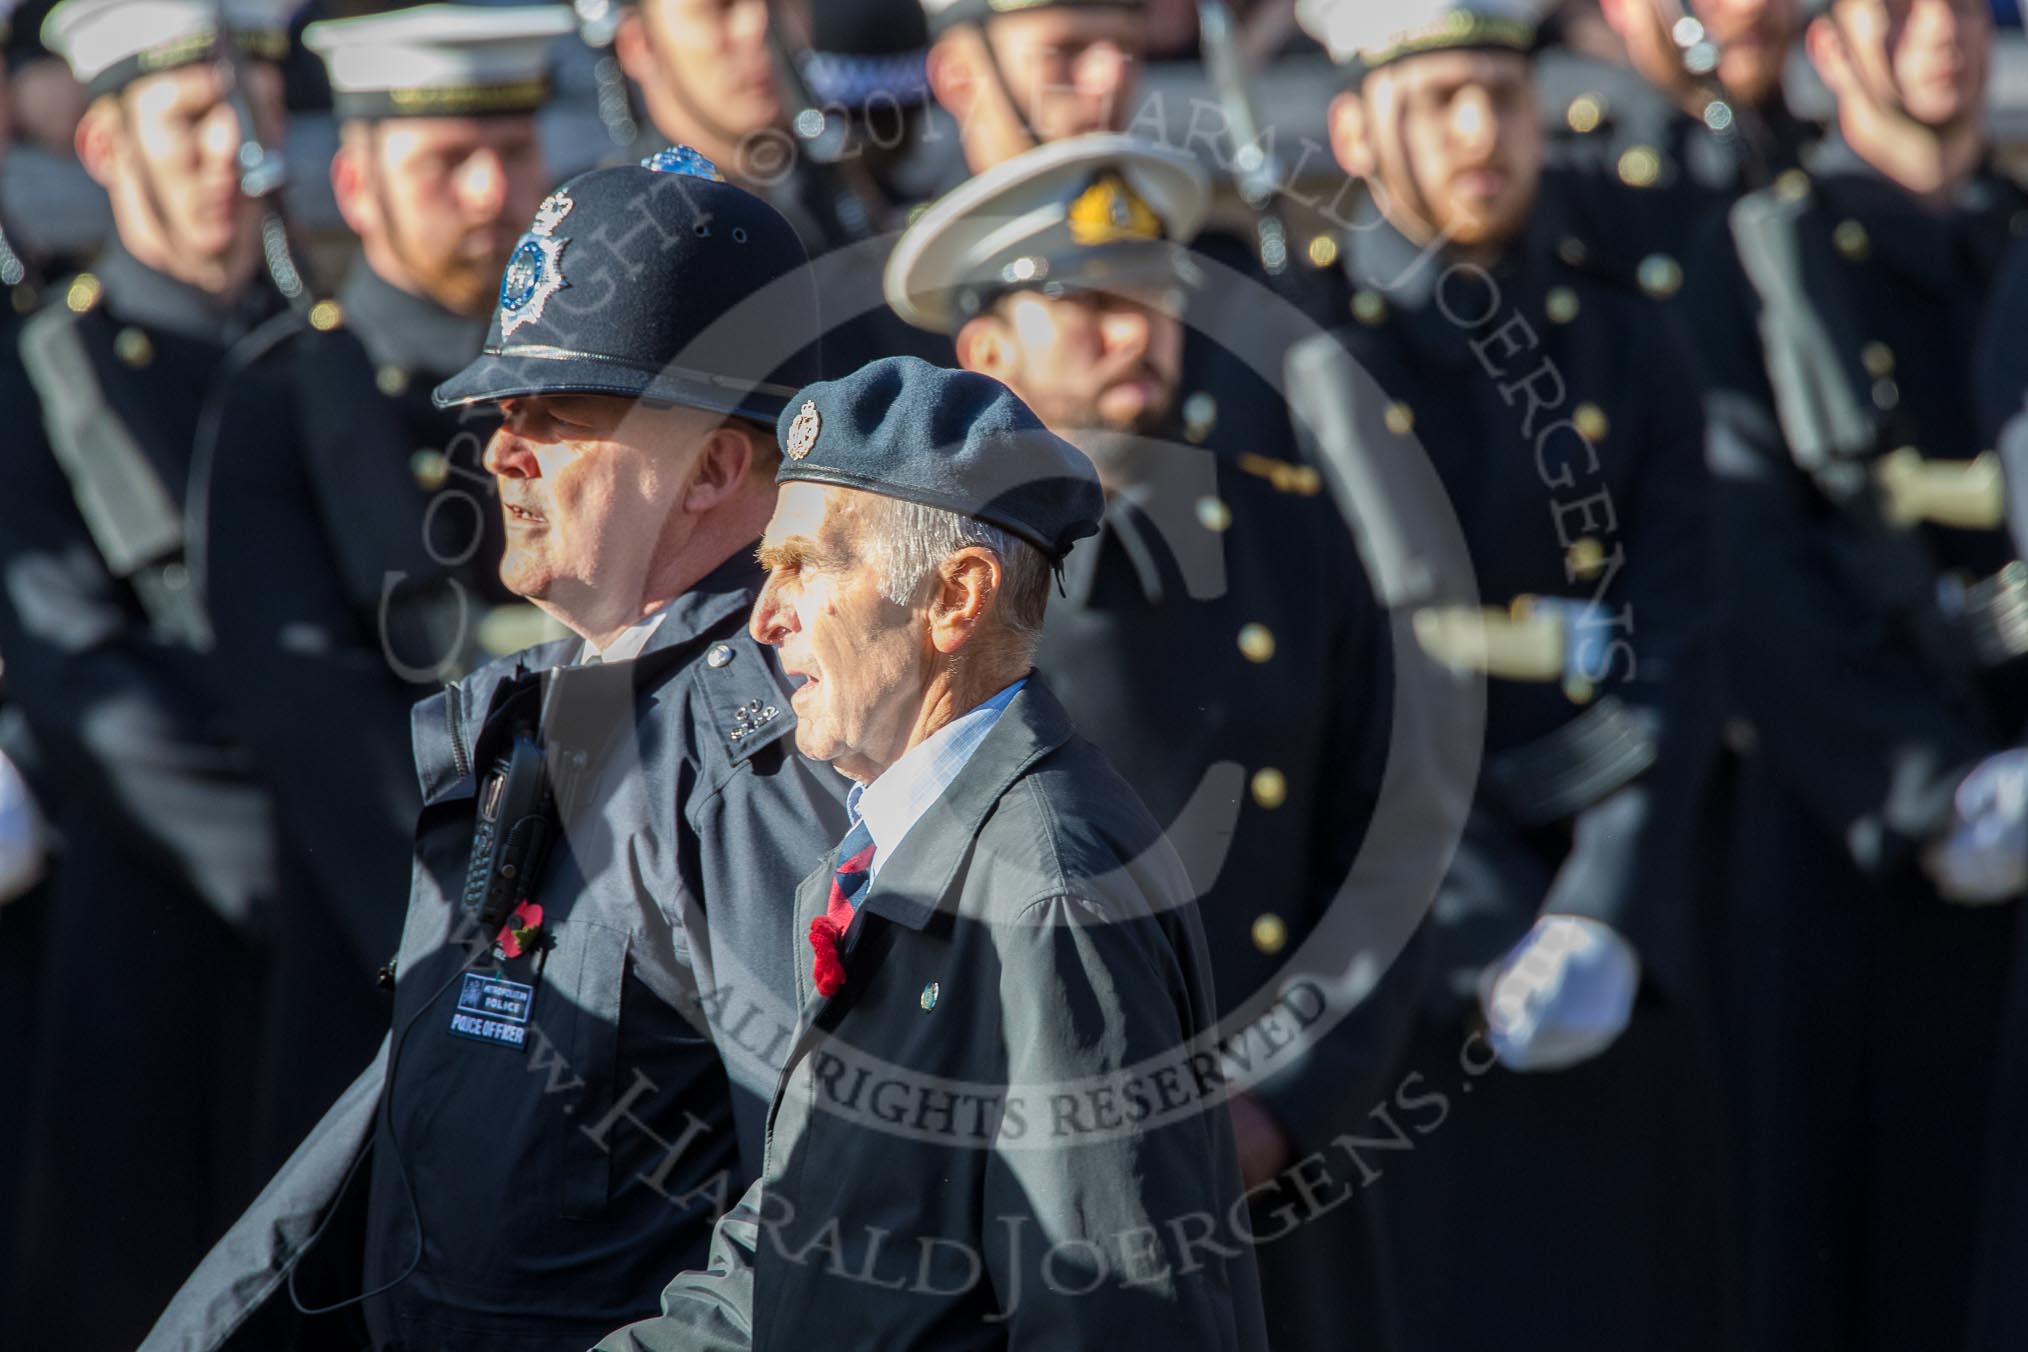 ??? during the Royal British Legion March Past on Remembrance Sunday at the Cenotaph, Whitehall, Westminster, London, 11 November 2018, 11:59.